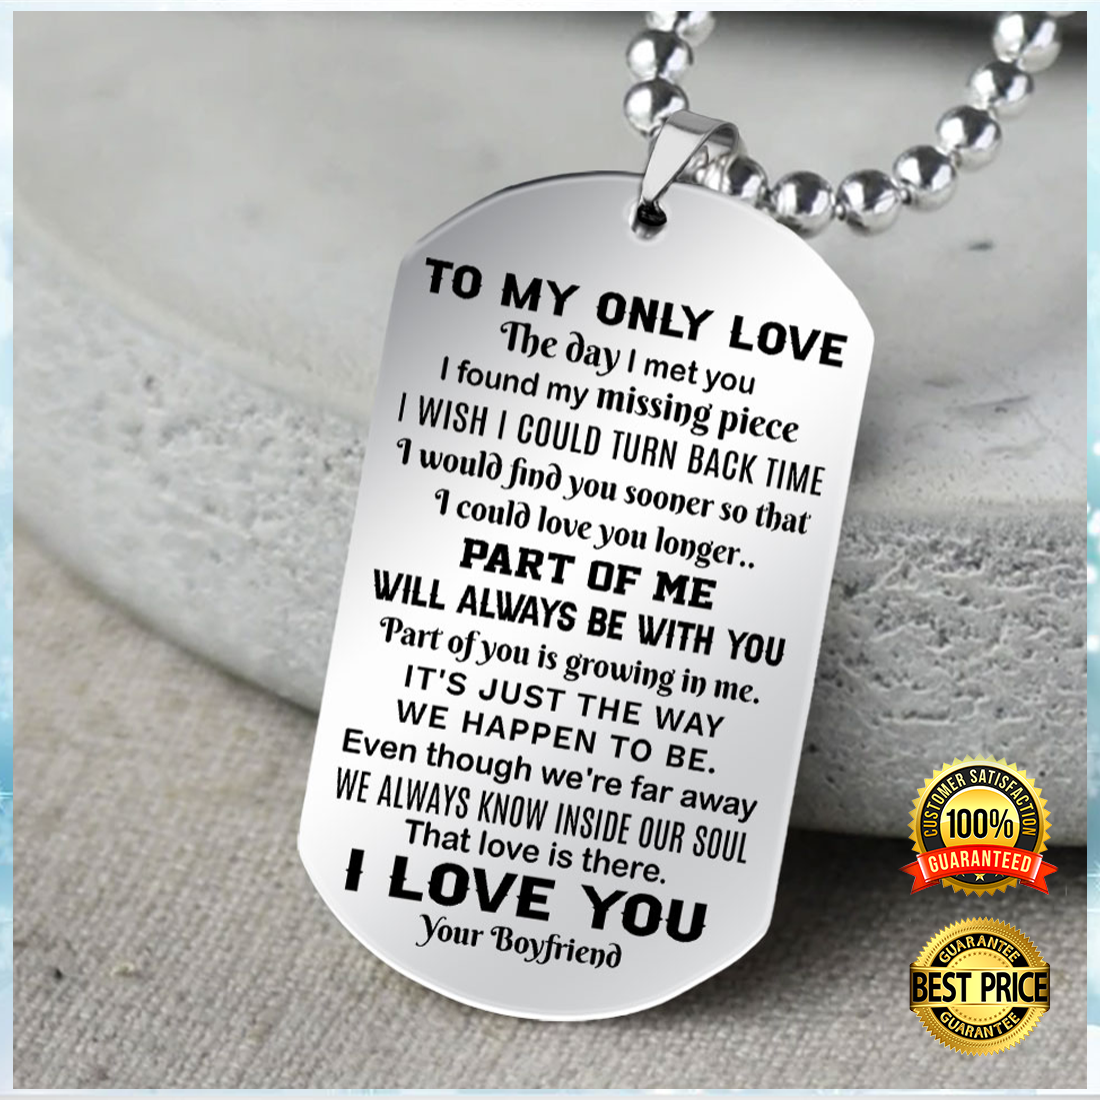 To my only love the day i met you i found my missing piece dog tag